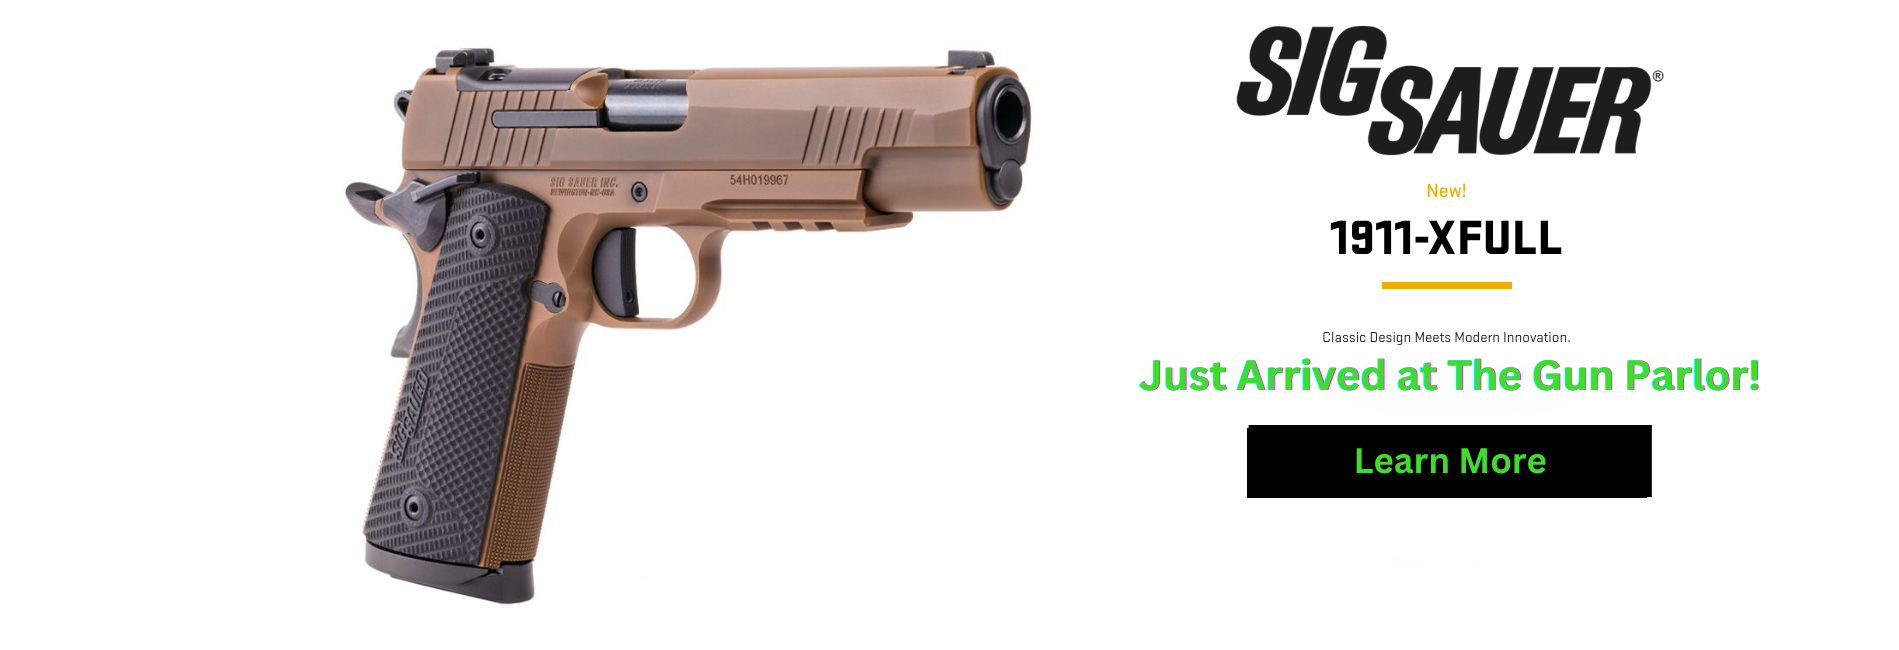 https://www.thegunparlor.com/products/sig-sauer-798681682256-798681682256-3873